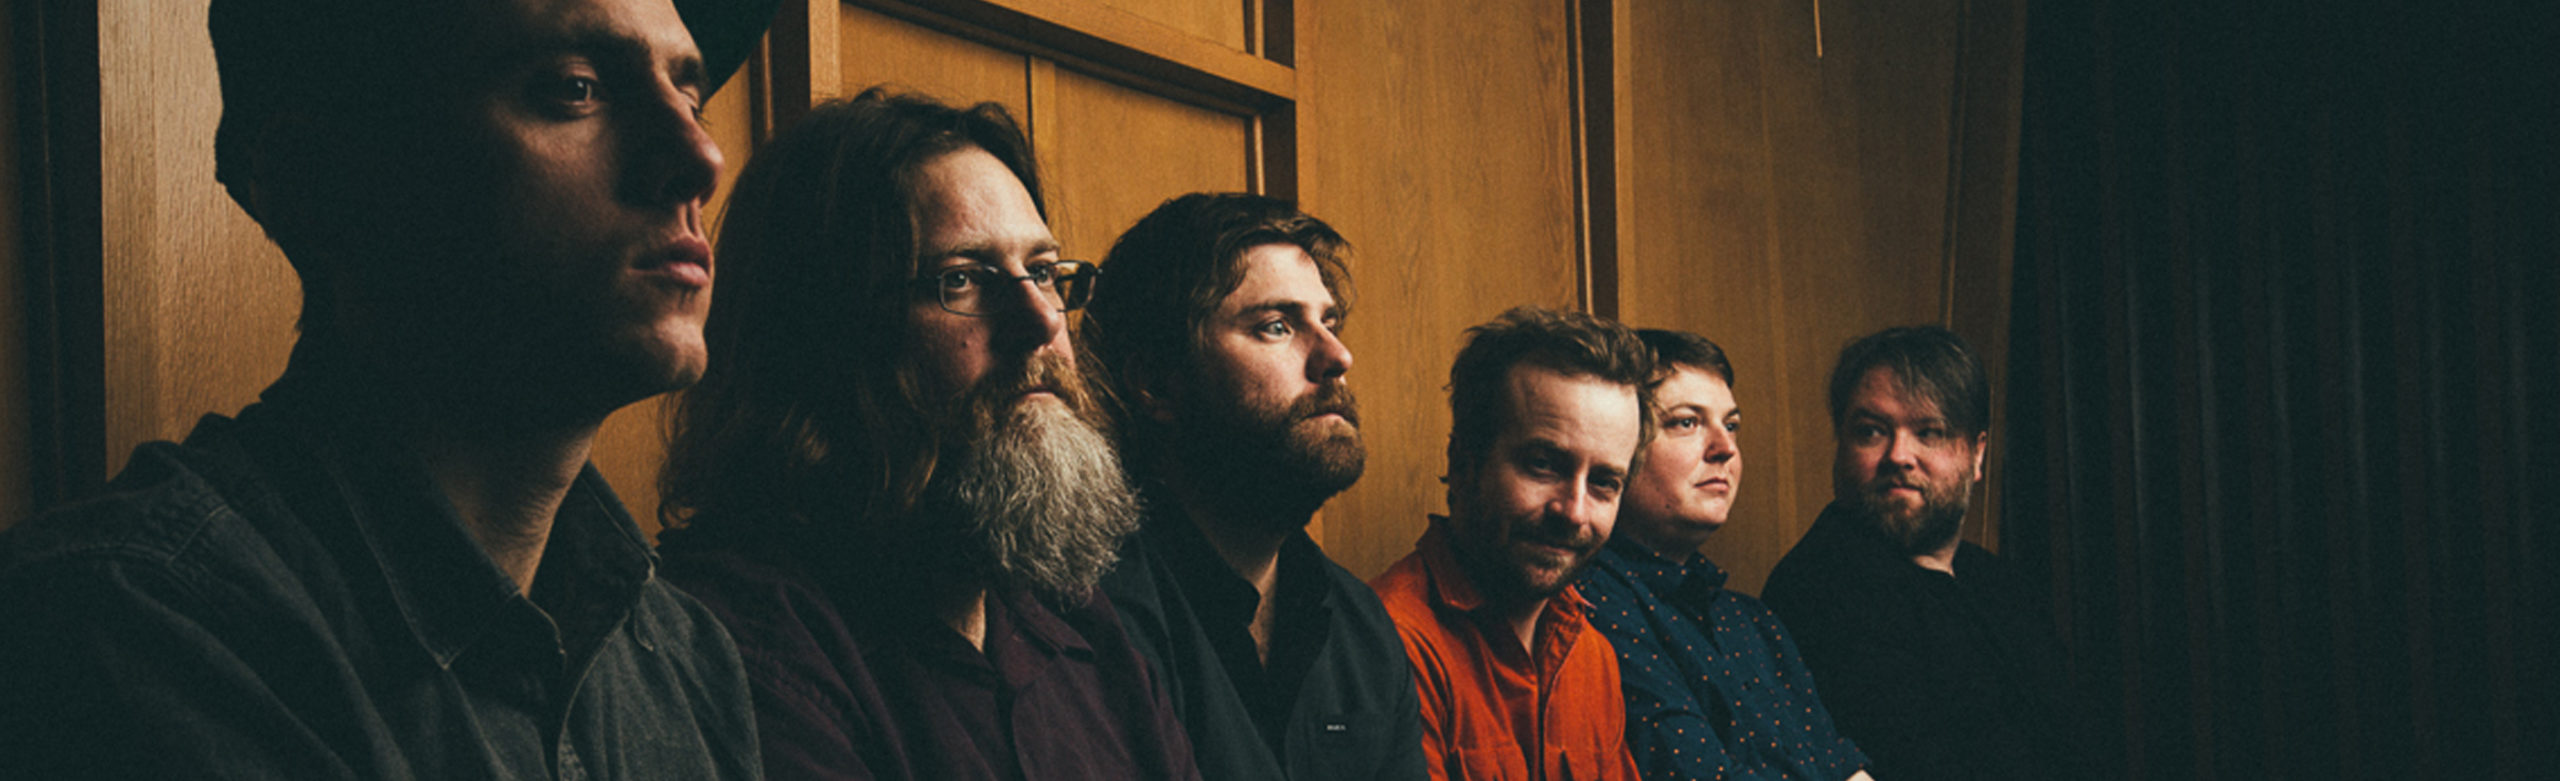 SPECIAL OFFER: Trampled by Turtles Premium Box Seats Released Image